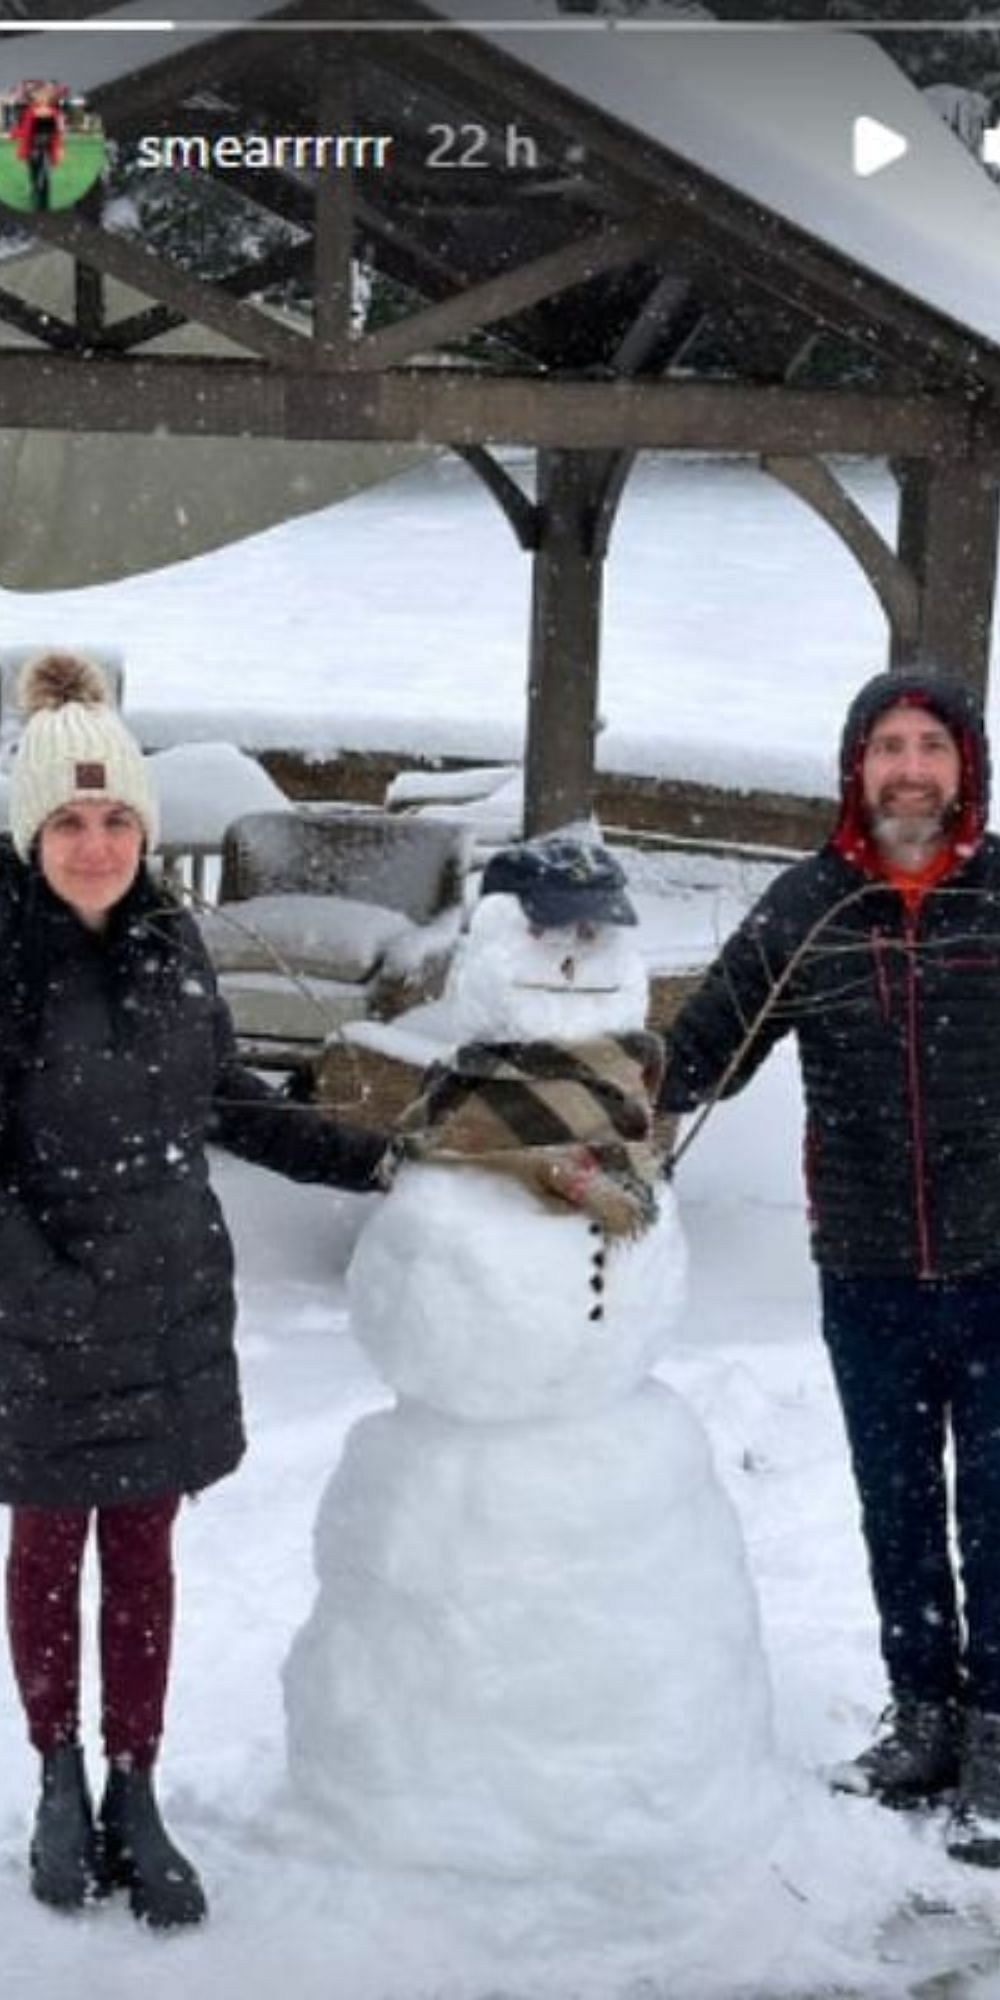 Samira and her husband Nicholas posing with the snowman.